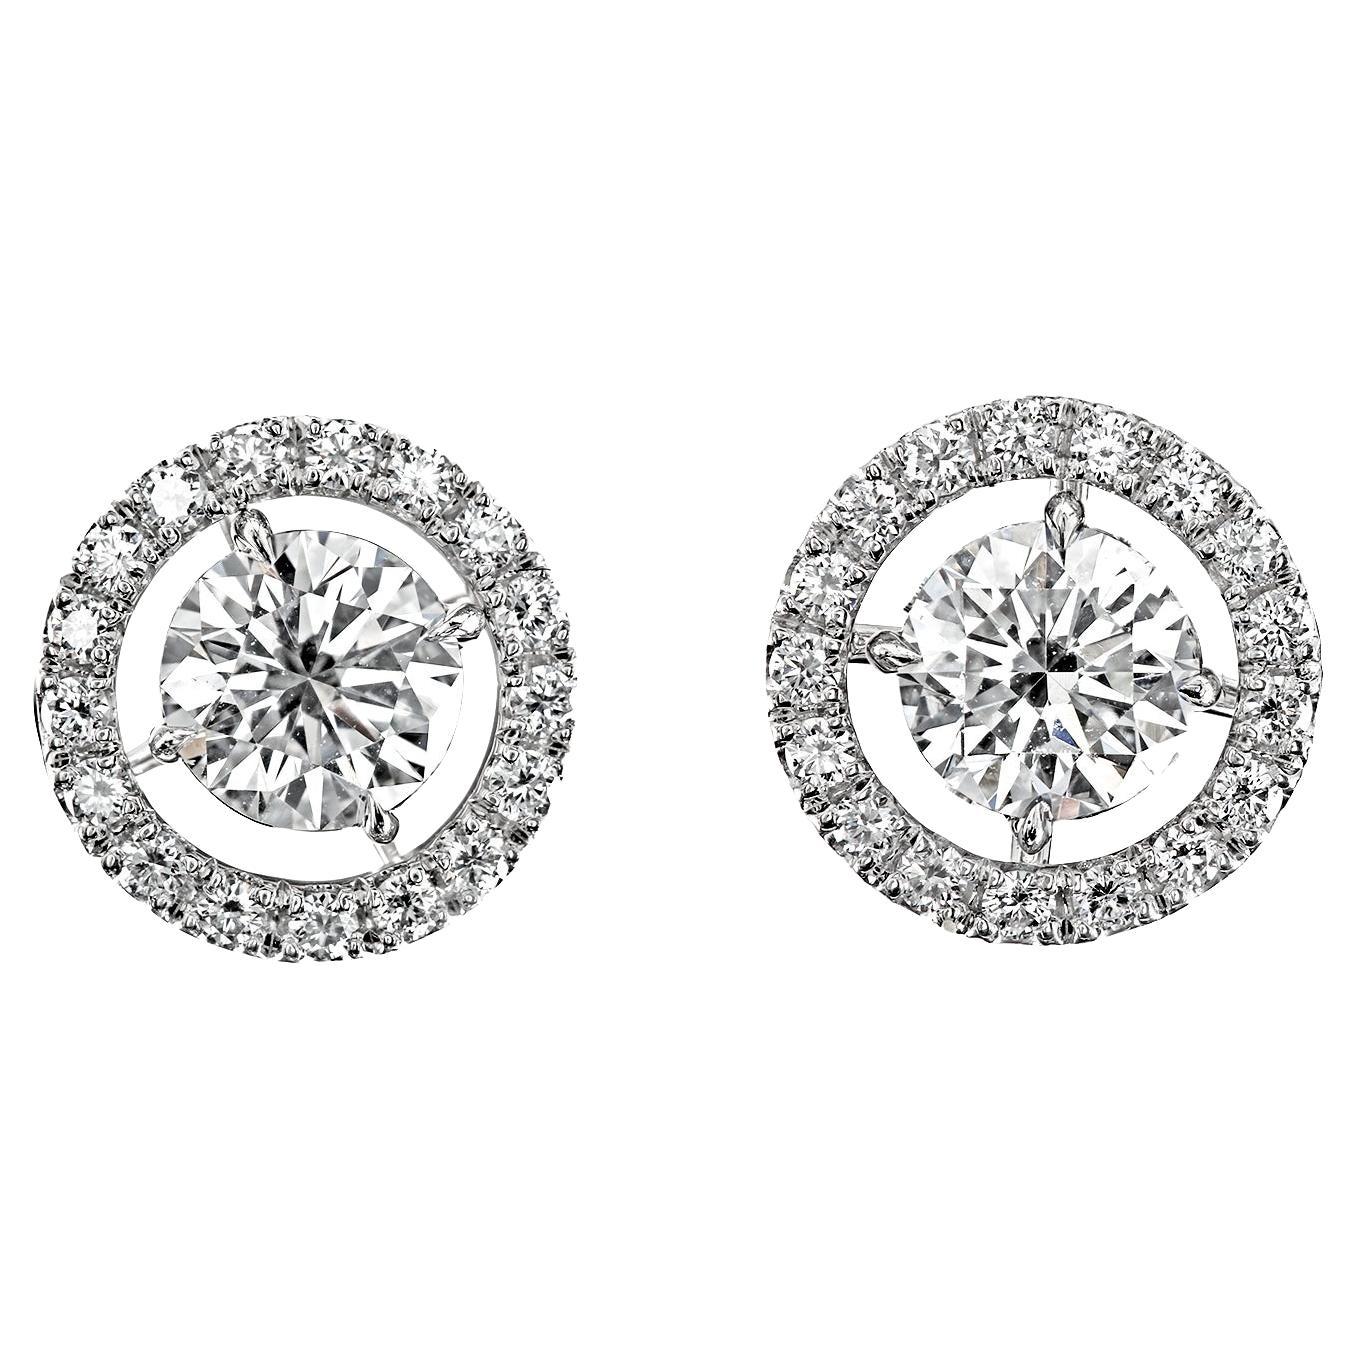 "Martini' Studs with Diamonds and Micro-Pave Jackets in Platinum by Leon Mege For Sale